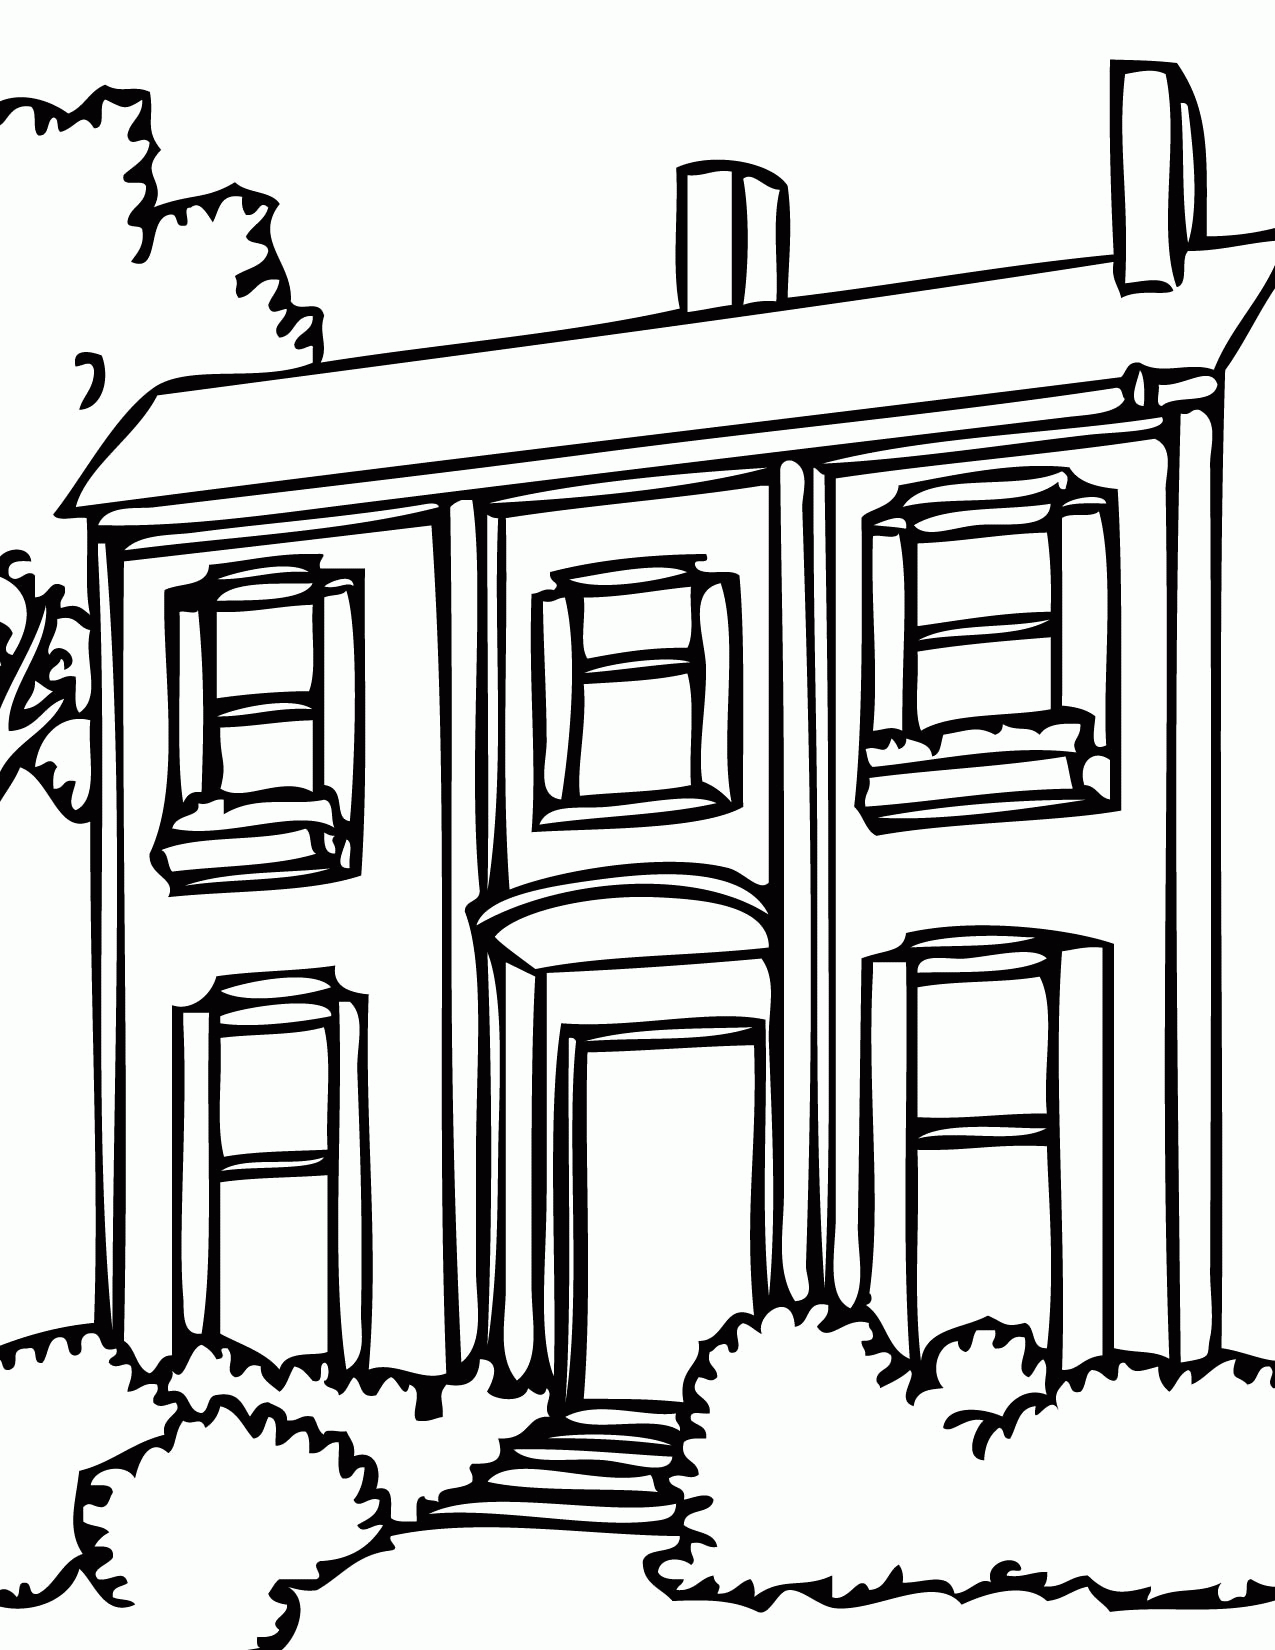 Neighborhood Coloring Page - Coloring Home